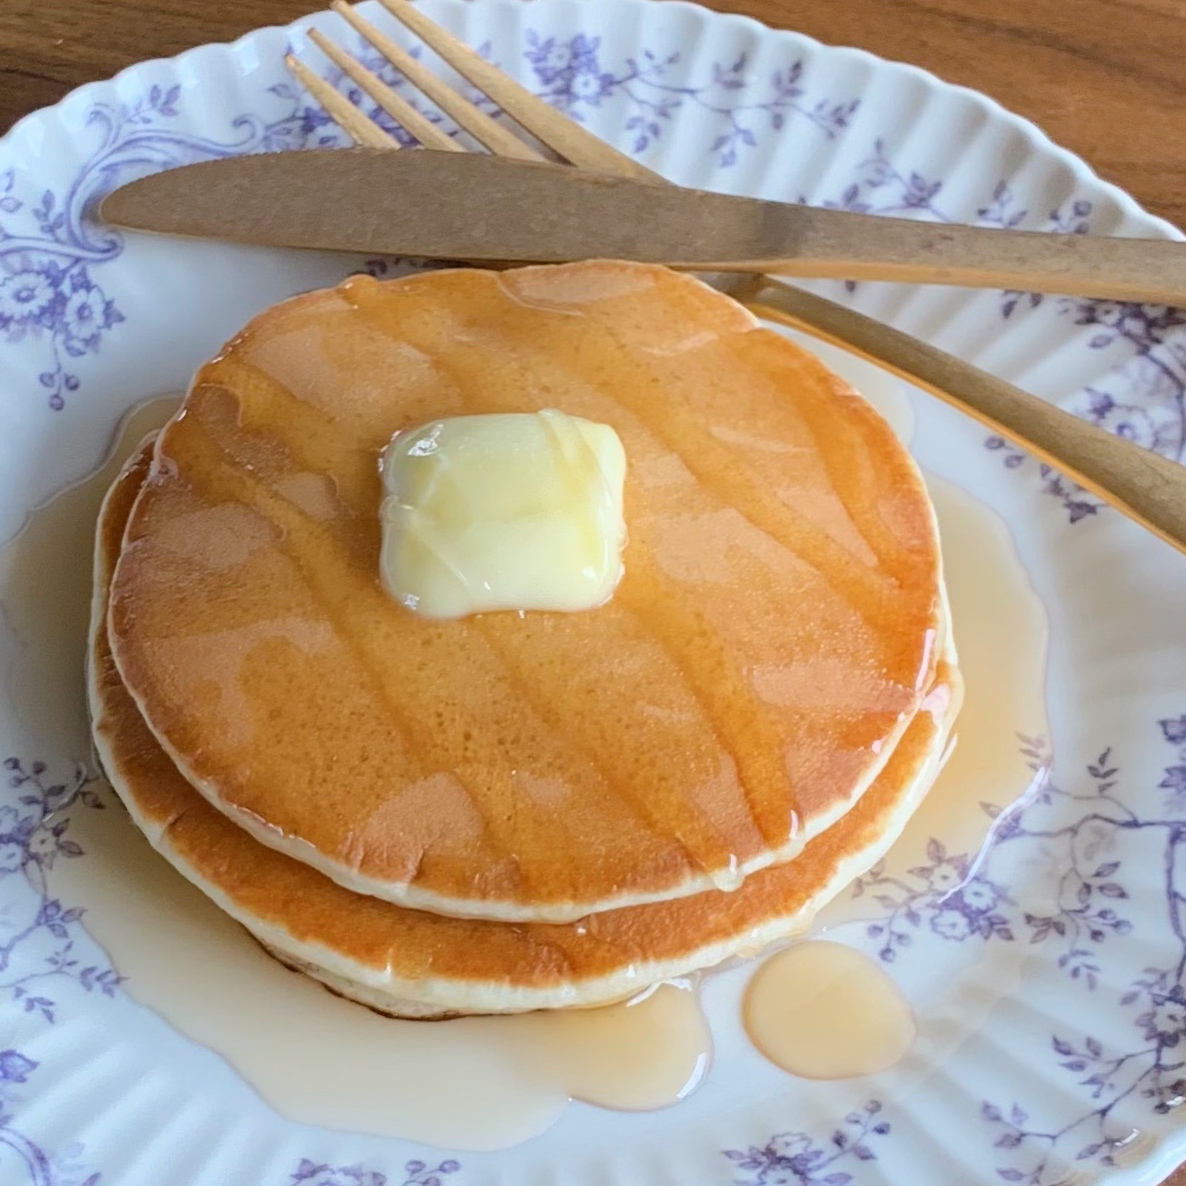 Pancakes made from pancake mix and topped with honey and butter.